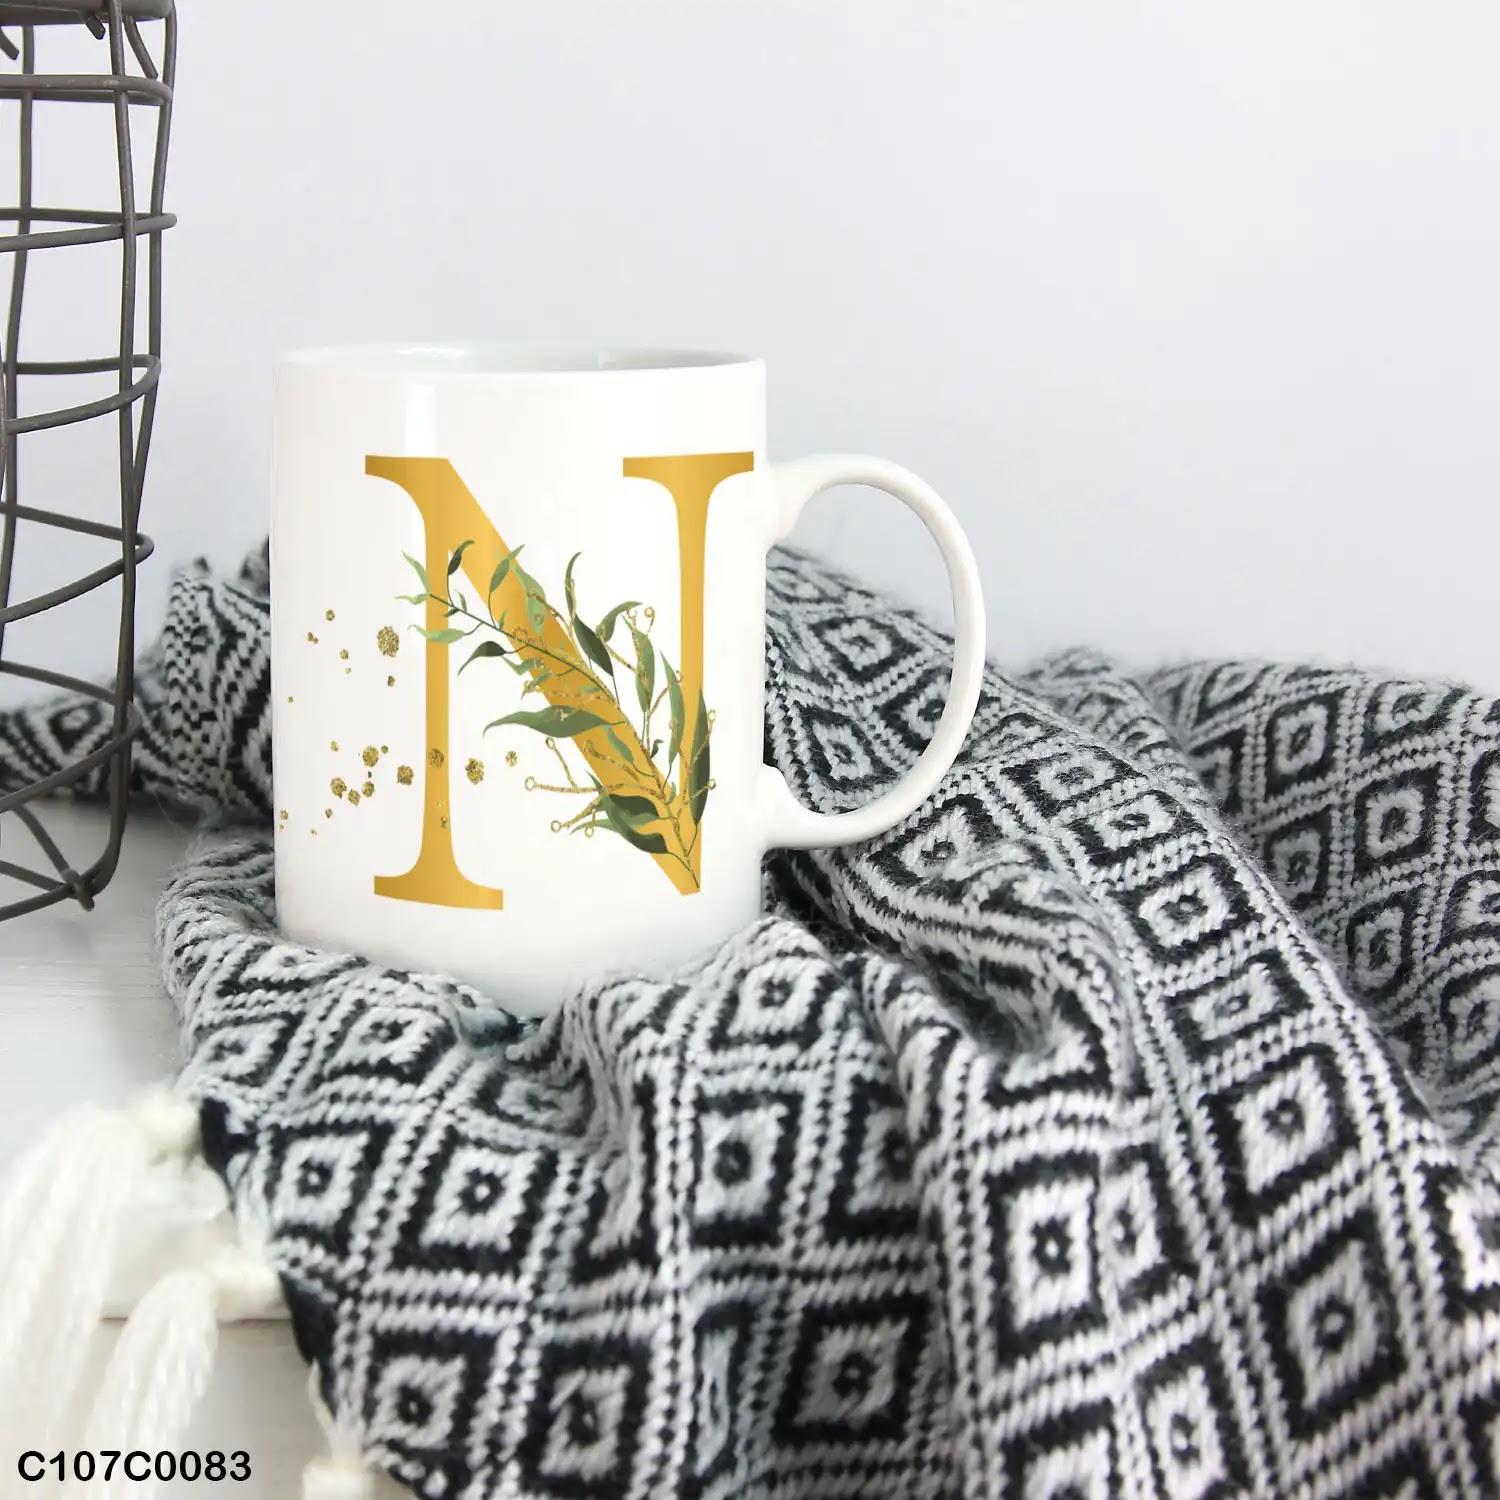 A white mug (cup) printed with gold Letter "N" and small green branch